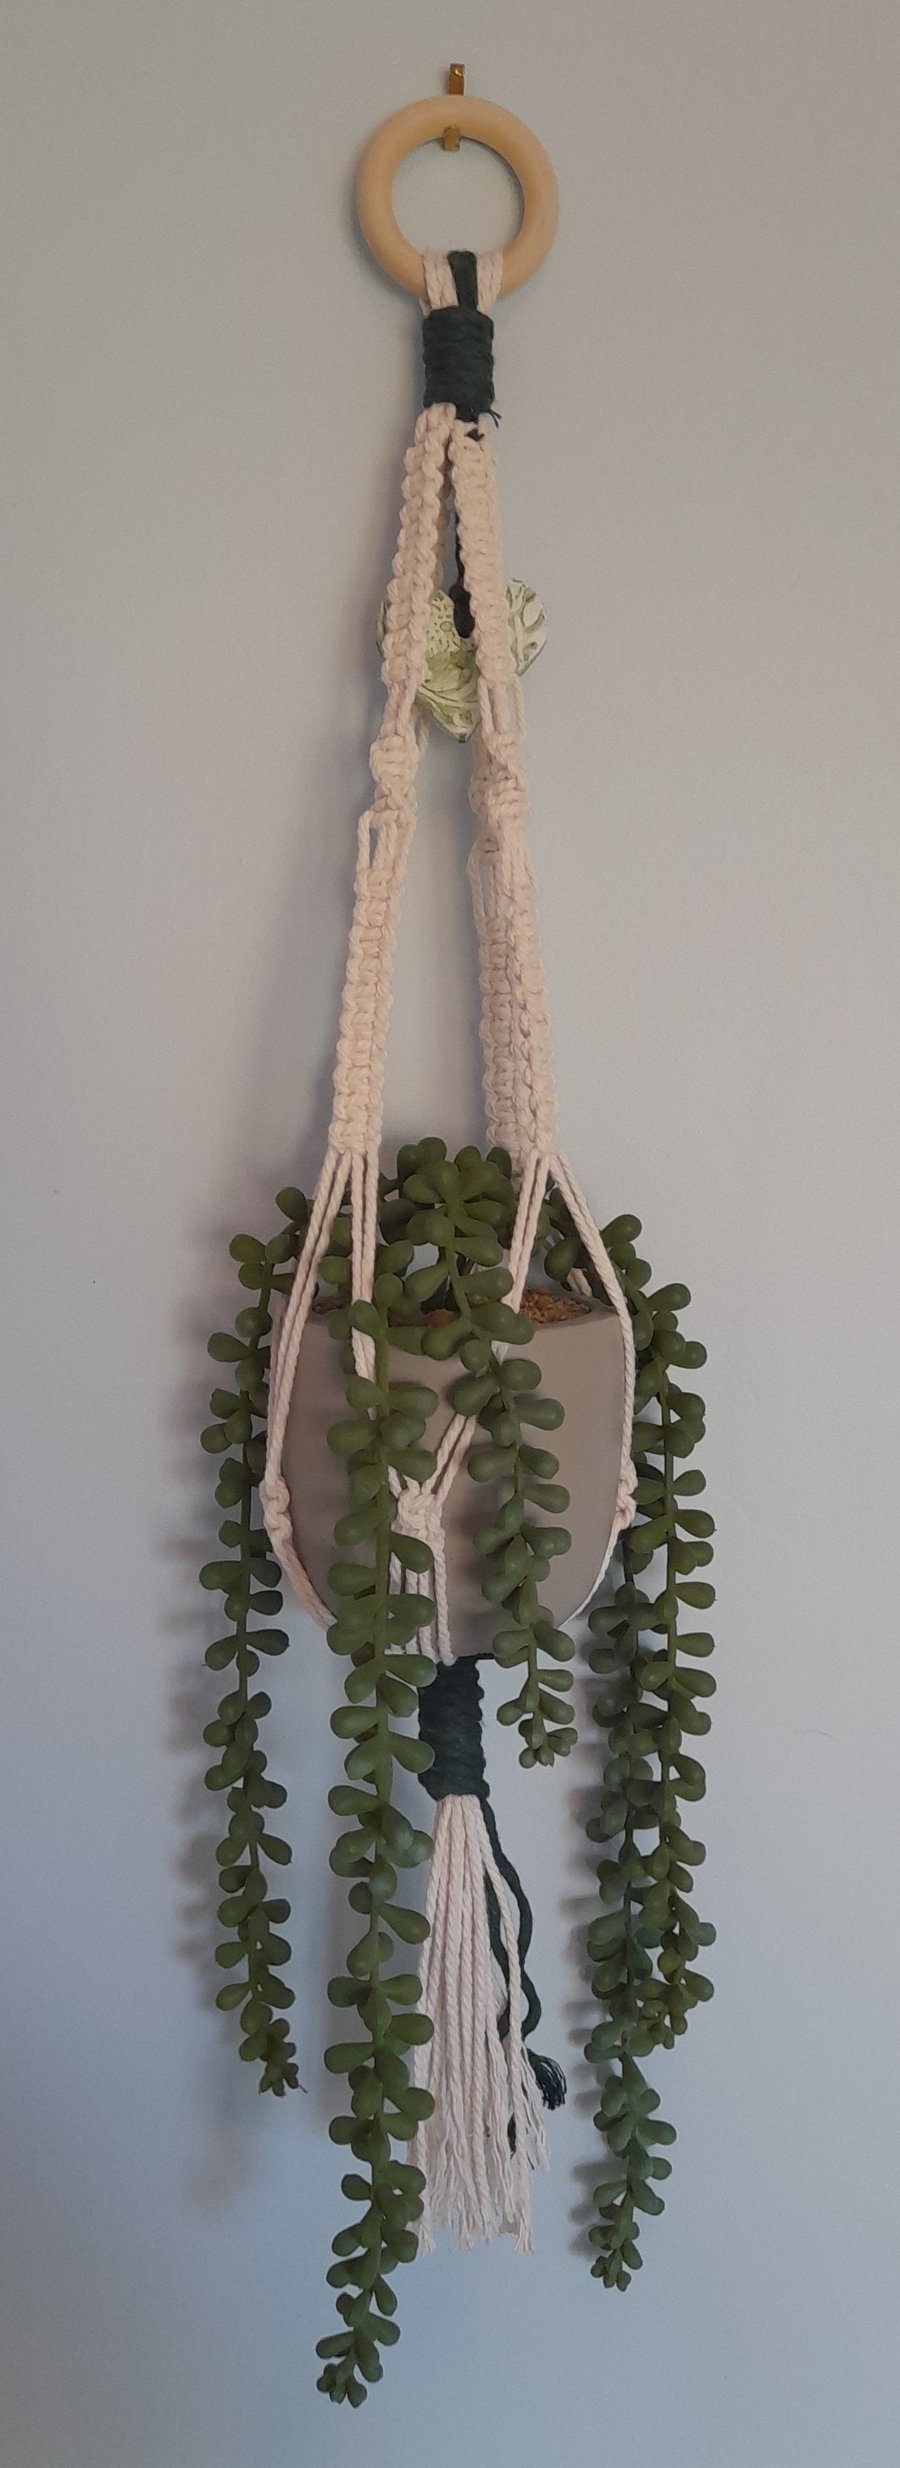 Handmade Macrame Hanging Basket - Recycled Twine, Air Dry Clay Embellishment